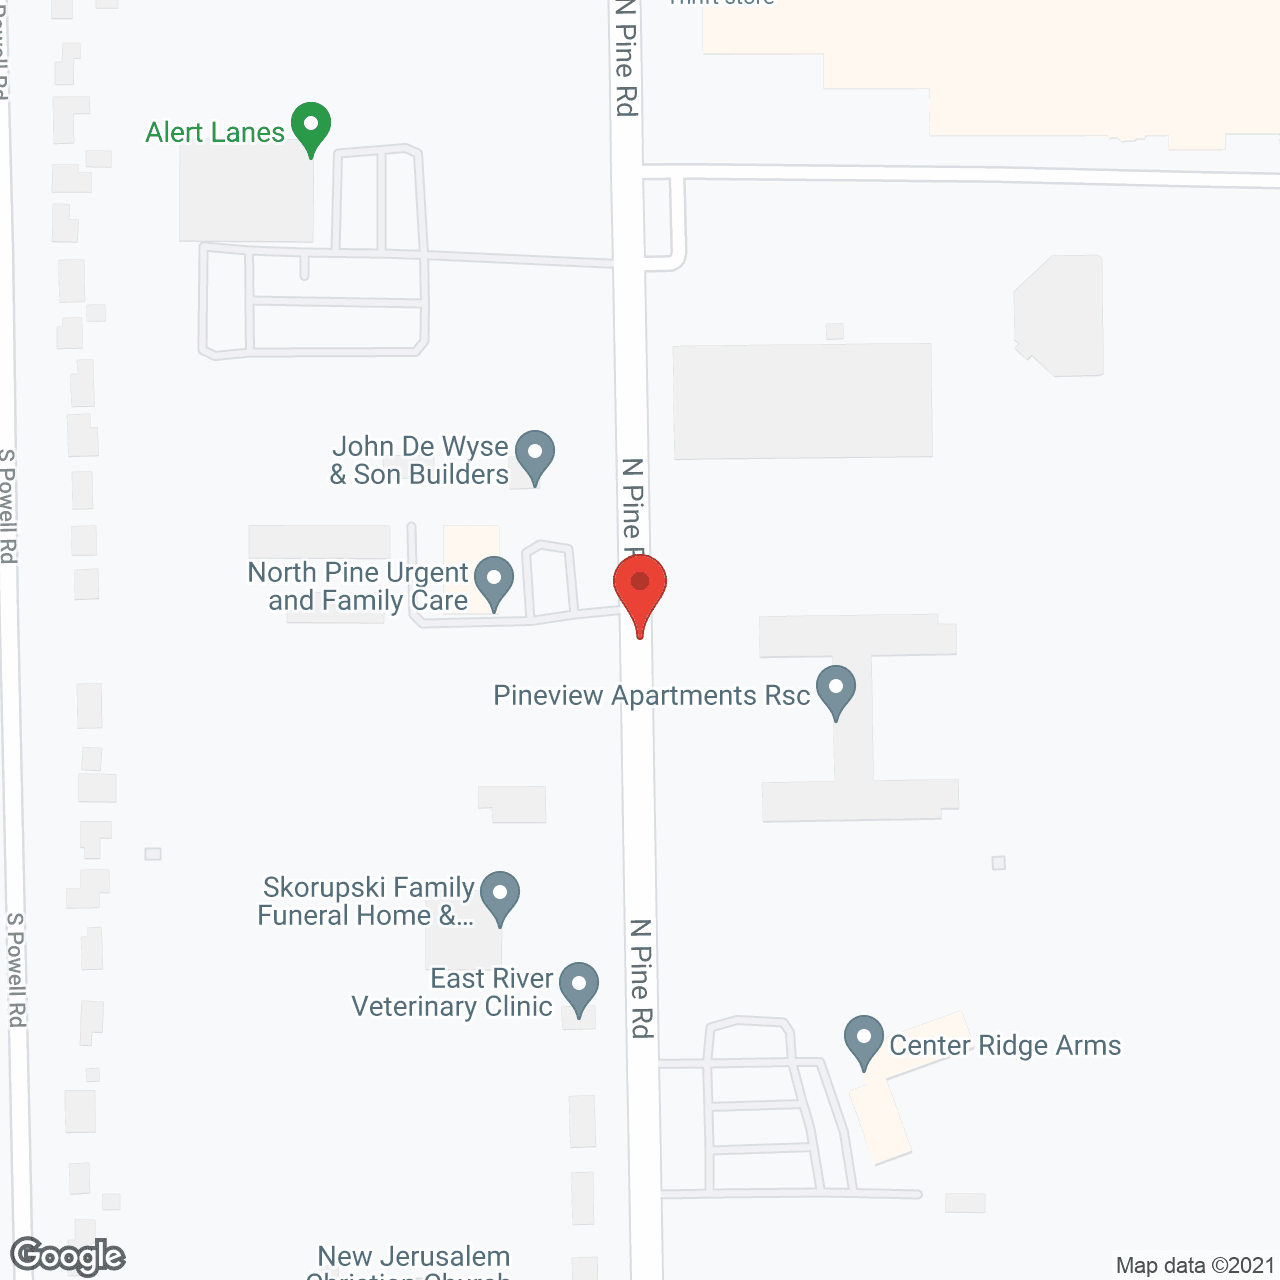 Pineview Apartments in google map